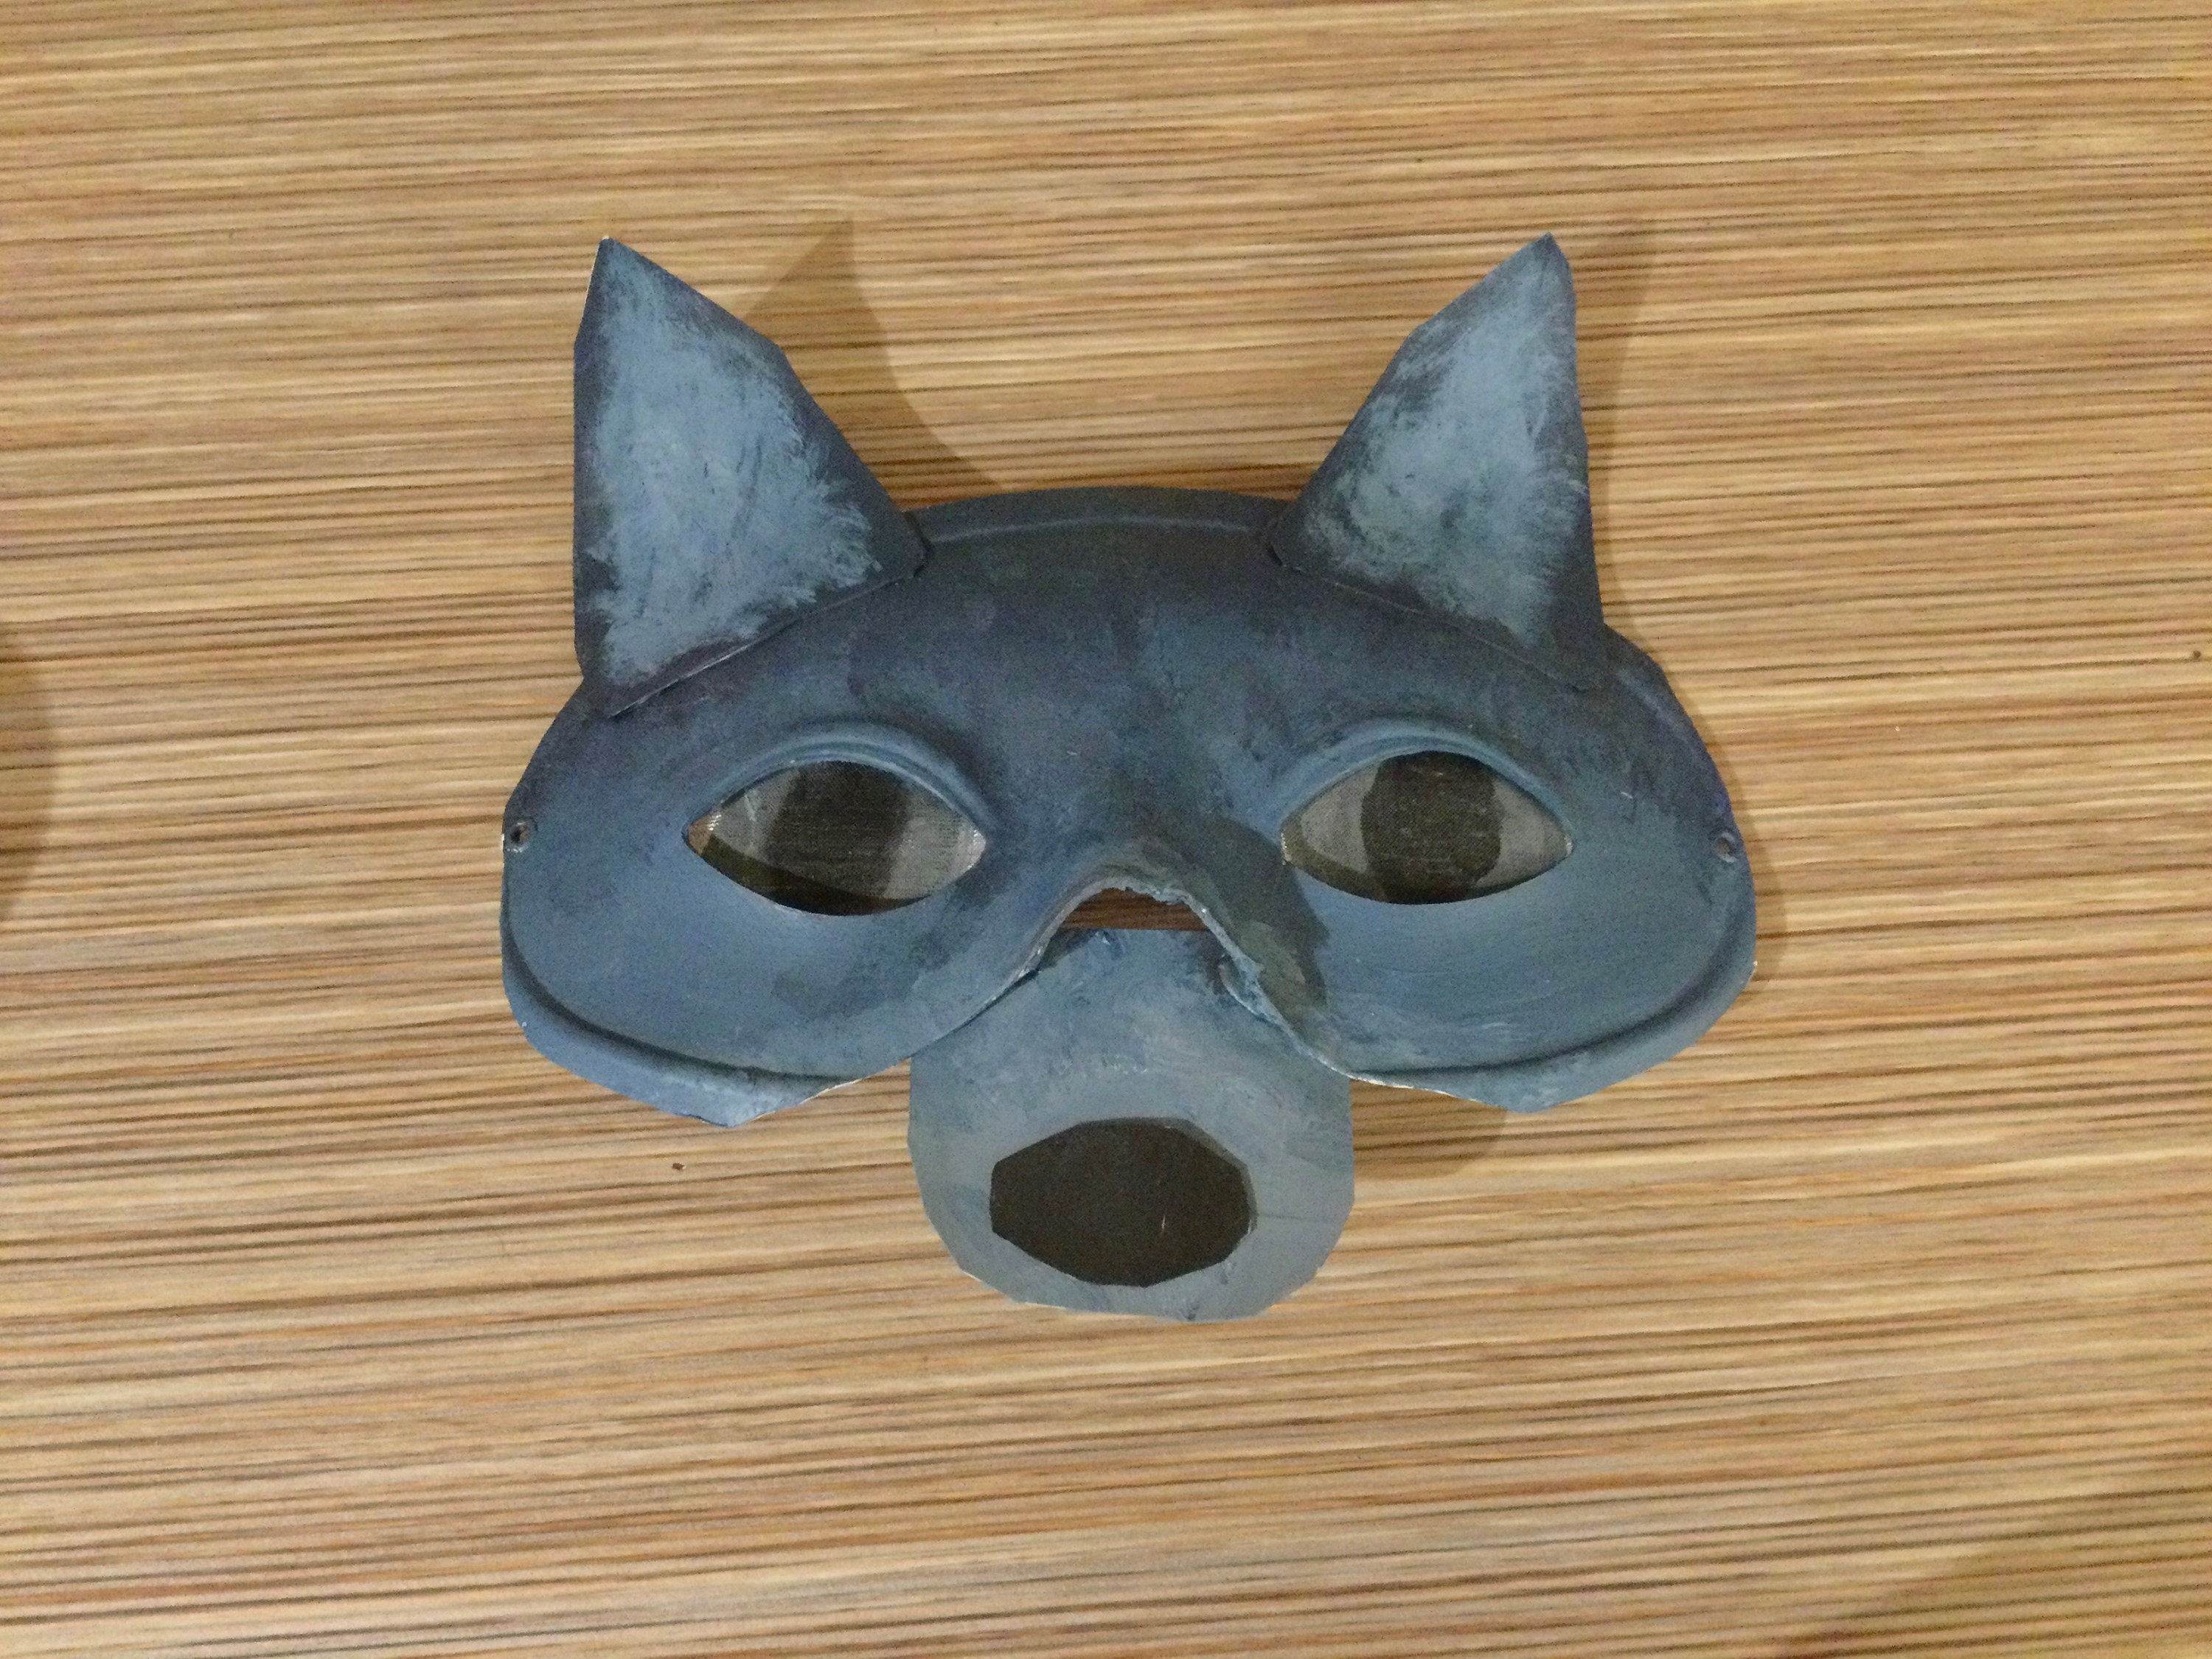 Red Cat Mask, Hand Painted, Hand Designed 